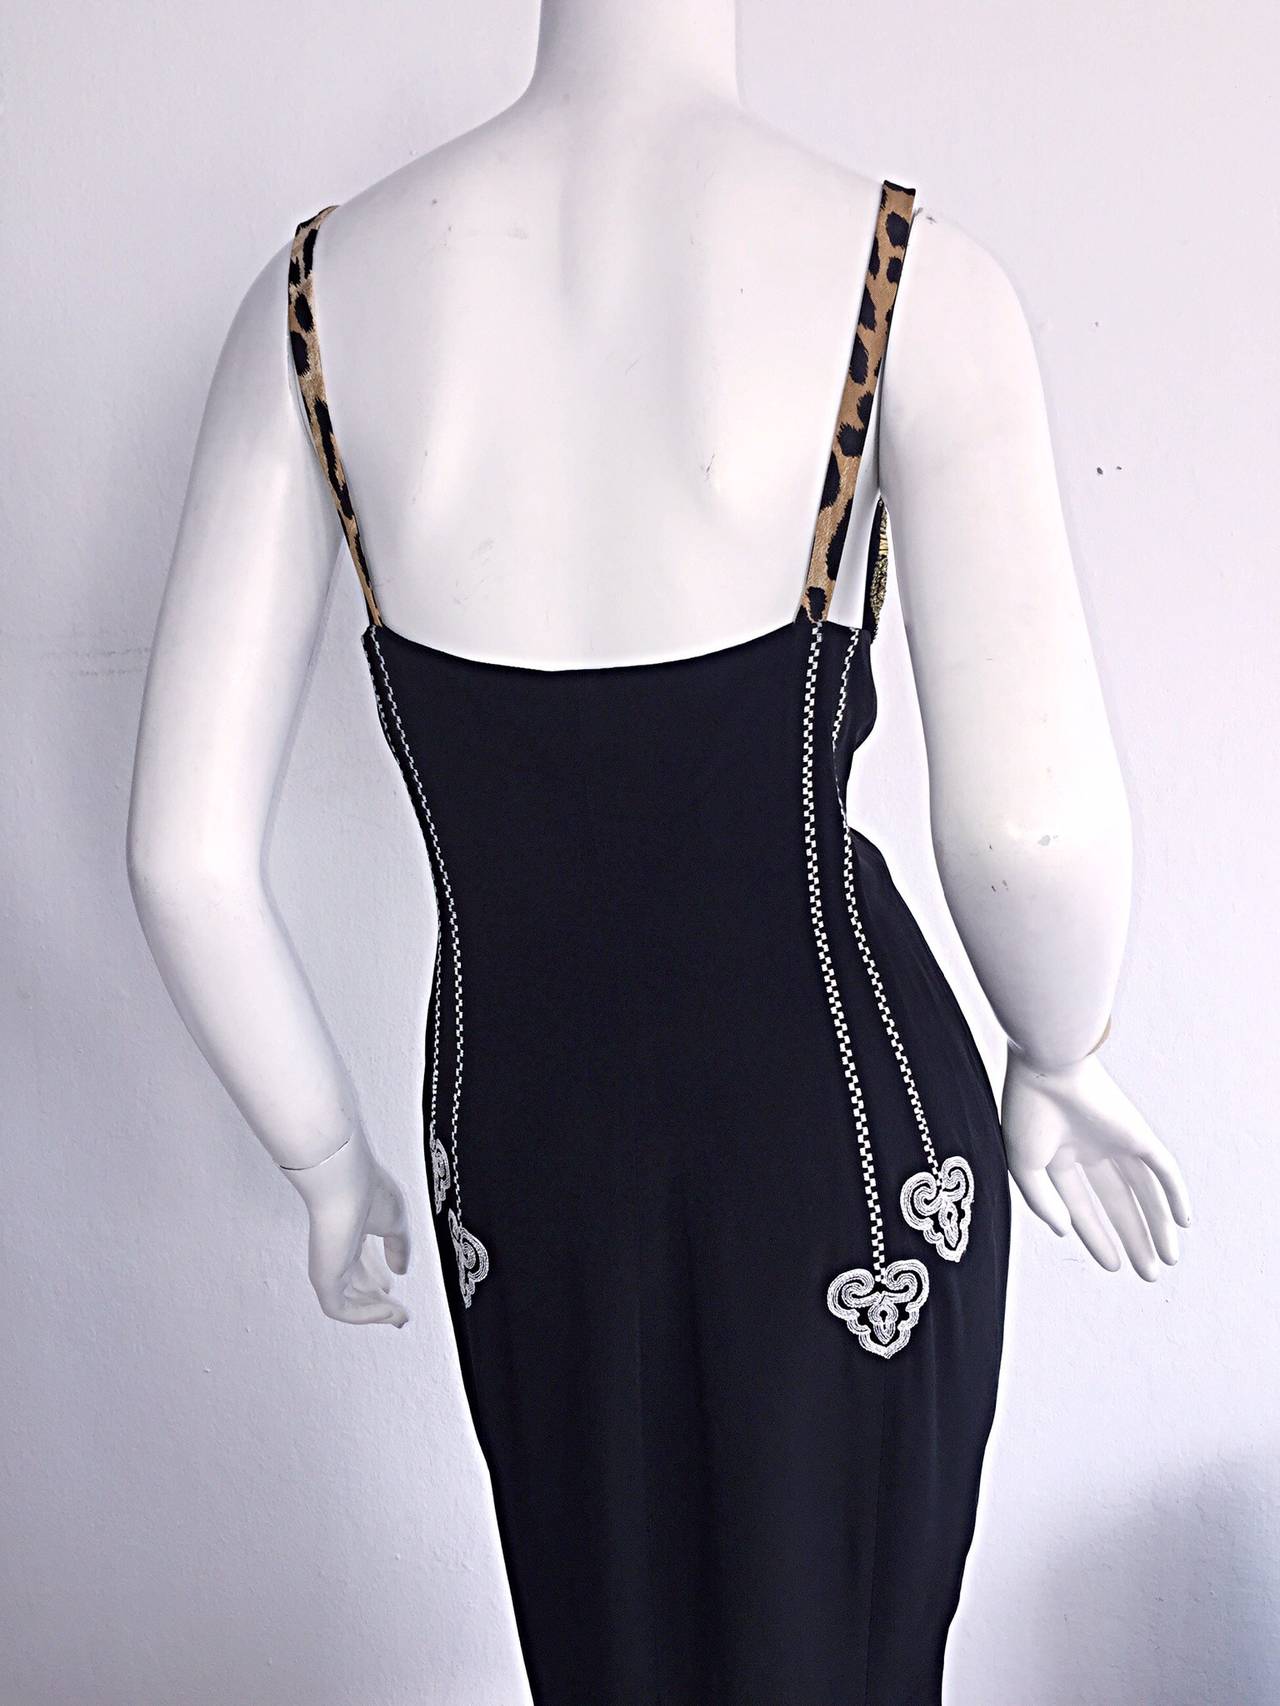 Super Rare Vintage Future Rifat Ozbek Sexy Ethnic Black Coin Dress In Excellent Condition For Sale In San Diego, CA